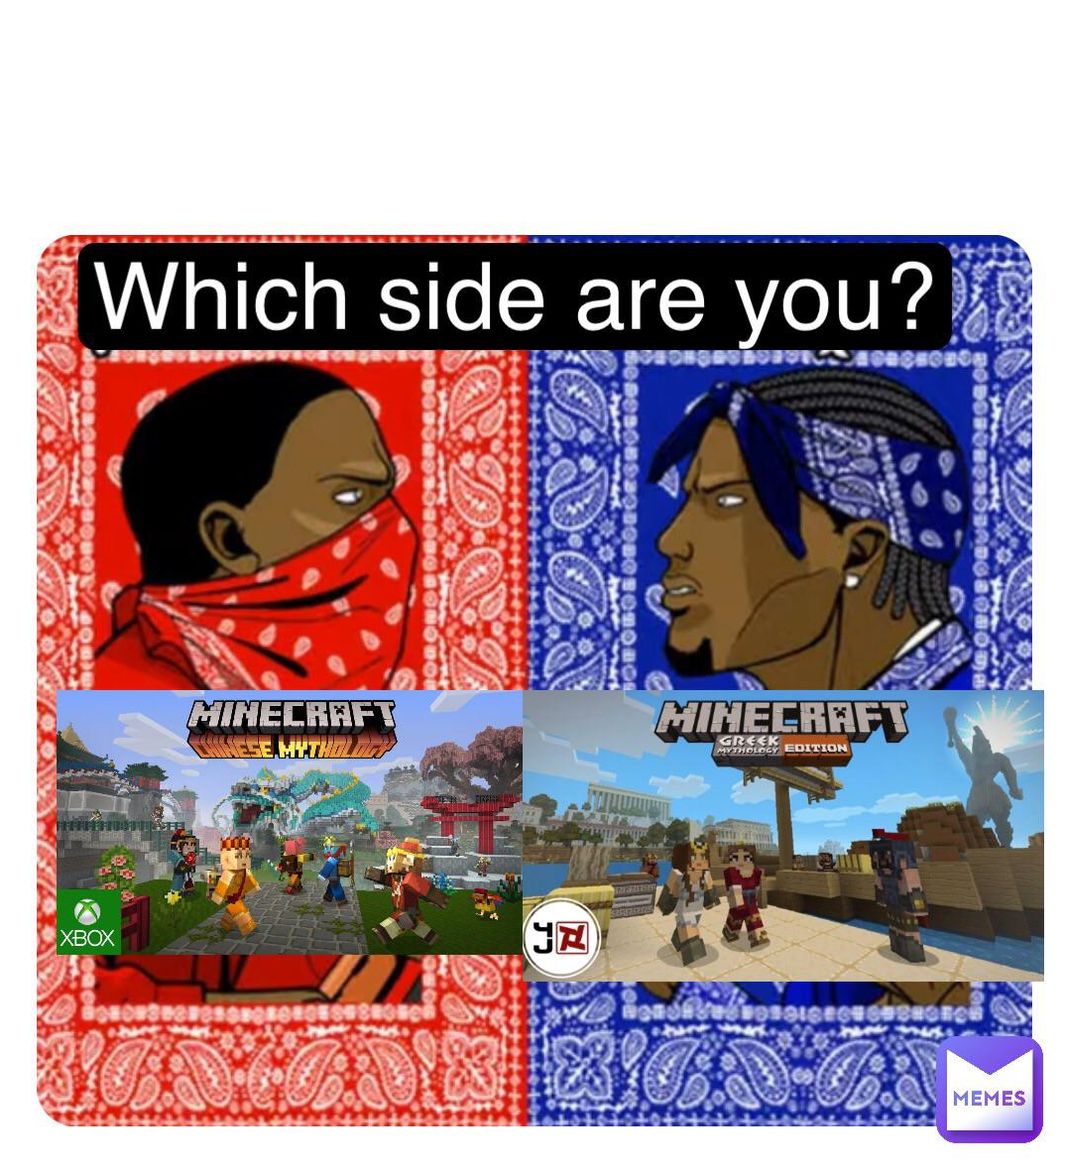 Minecraft Memes - "Pick a side, Minecrafters"